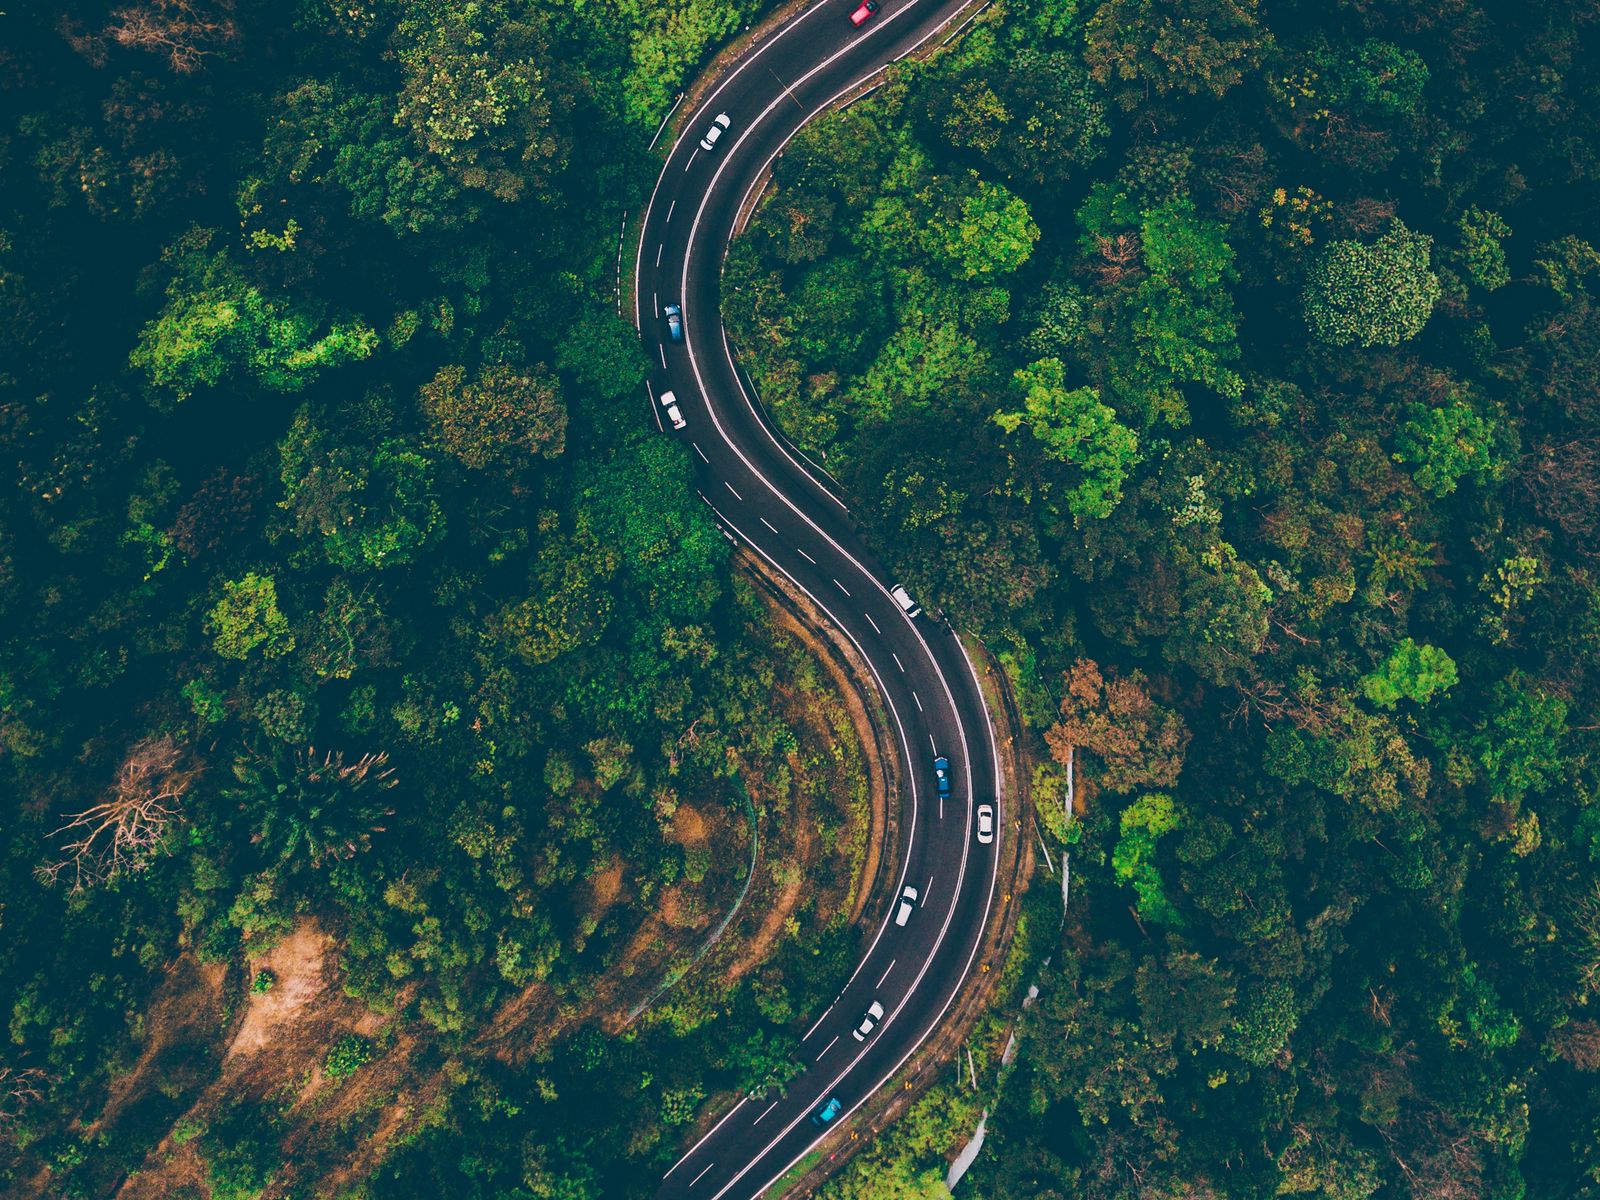 Download wallpaper 1600x1200 road, view from above, trees, winding road, batang kali, malaysia standard 4:3 HD background